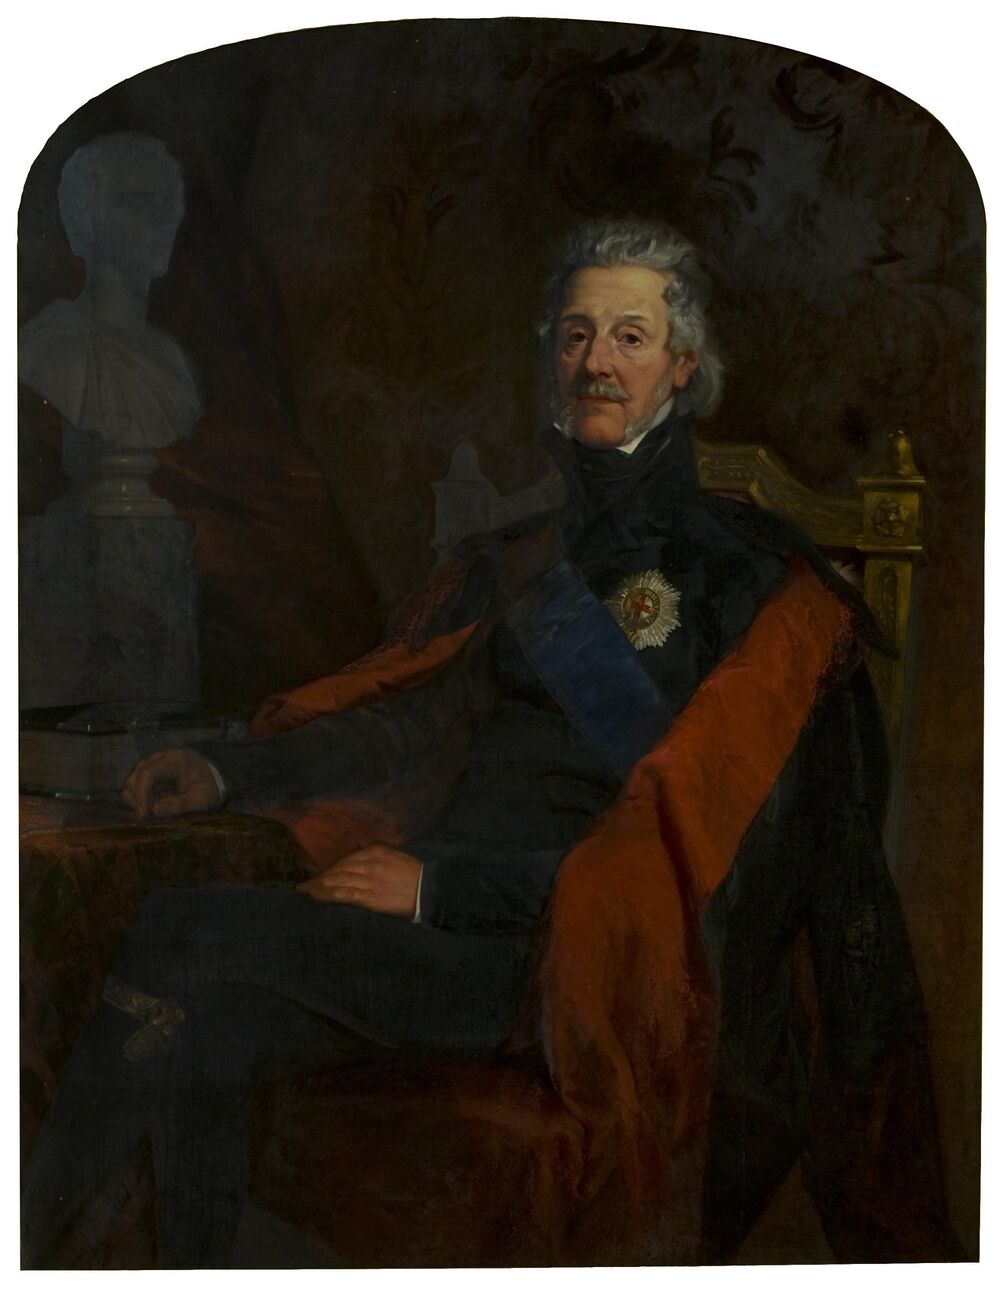 A portrait oil painting of an older man seated on a wooden chair, with his legs crossed. He wears a formal military-style uniform with a dark jacket with a very high collar, and a blue sash across his body. He also wears a black and red cape over his shoulders, which falls behind him.